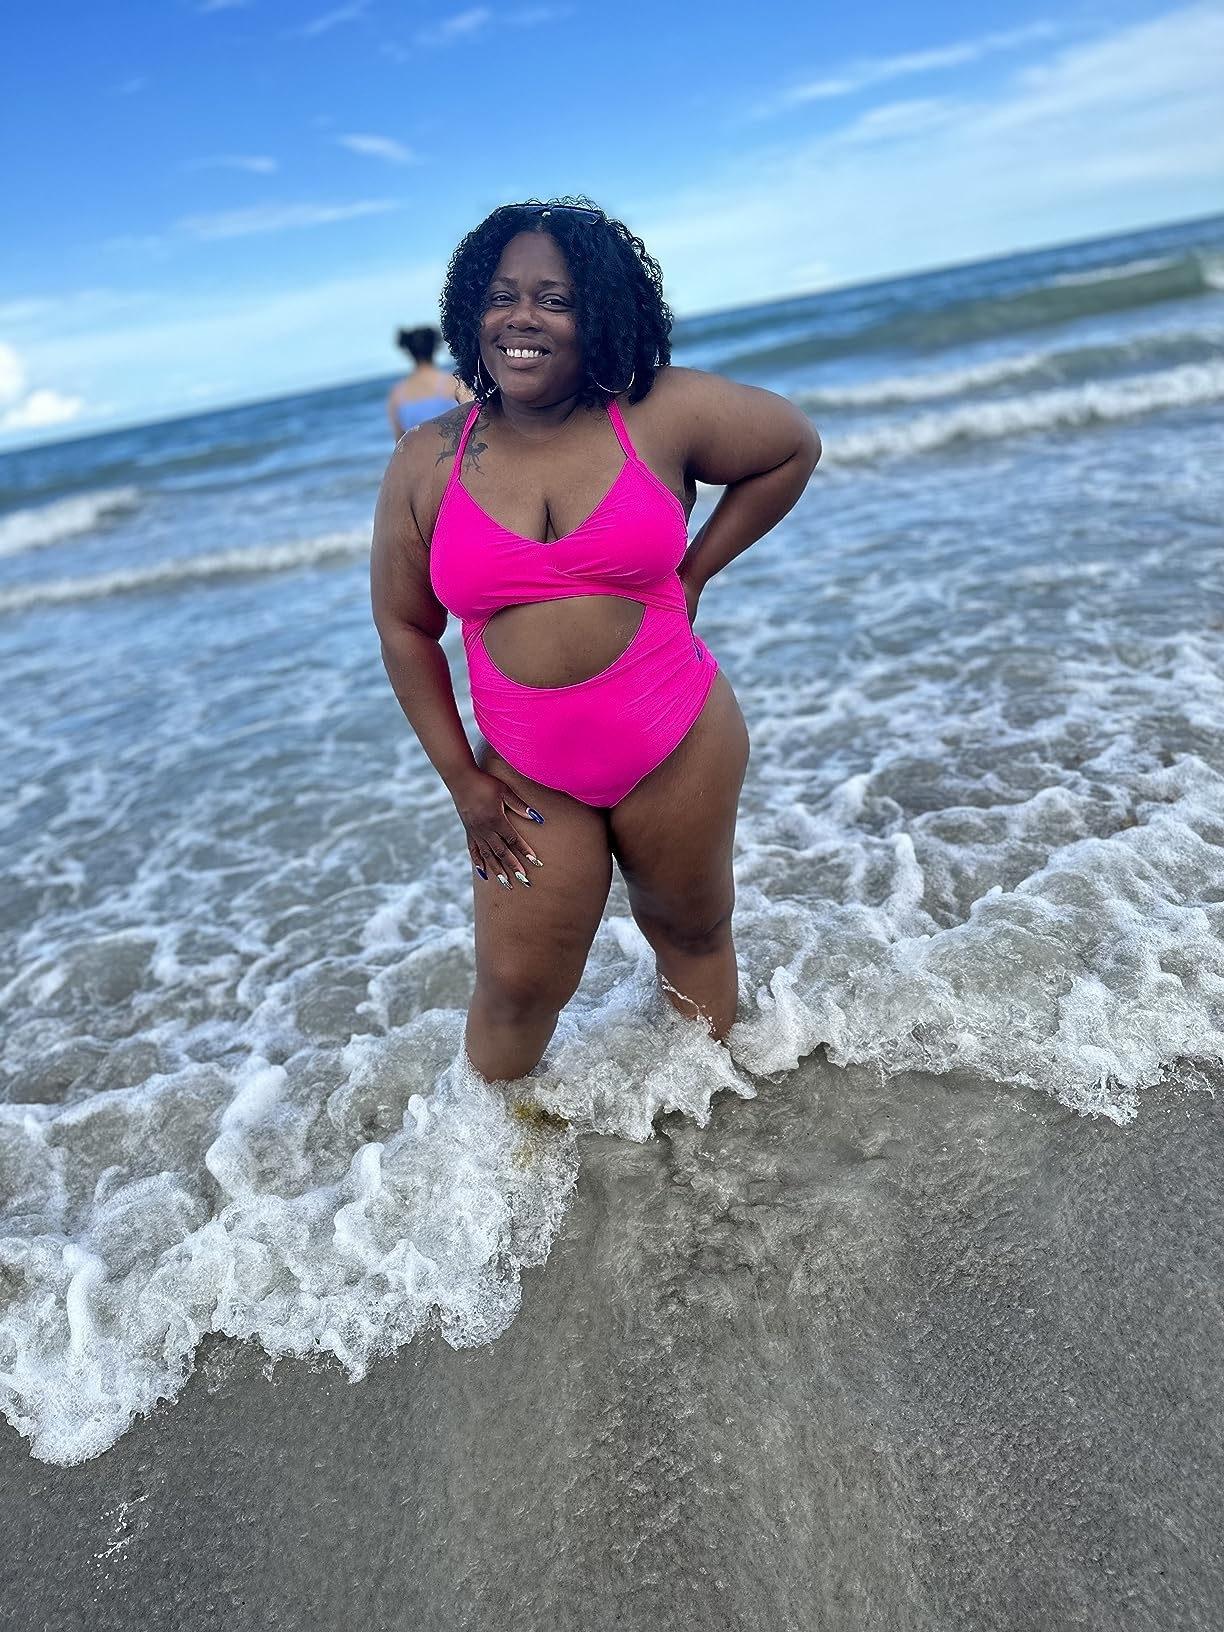 Model in a pink two-piece swimsuit standing on a beach with waves around her feet